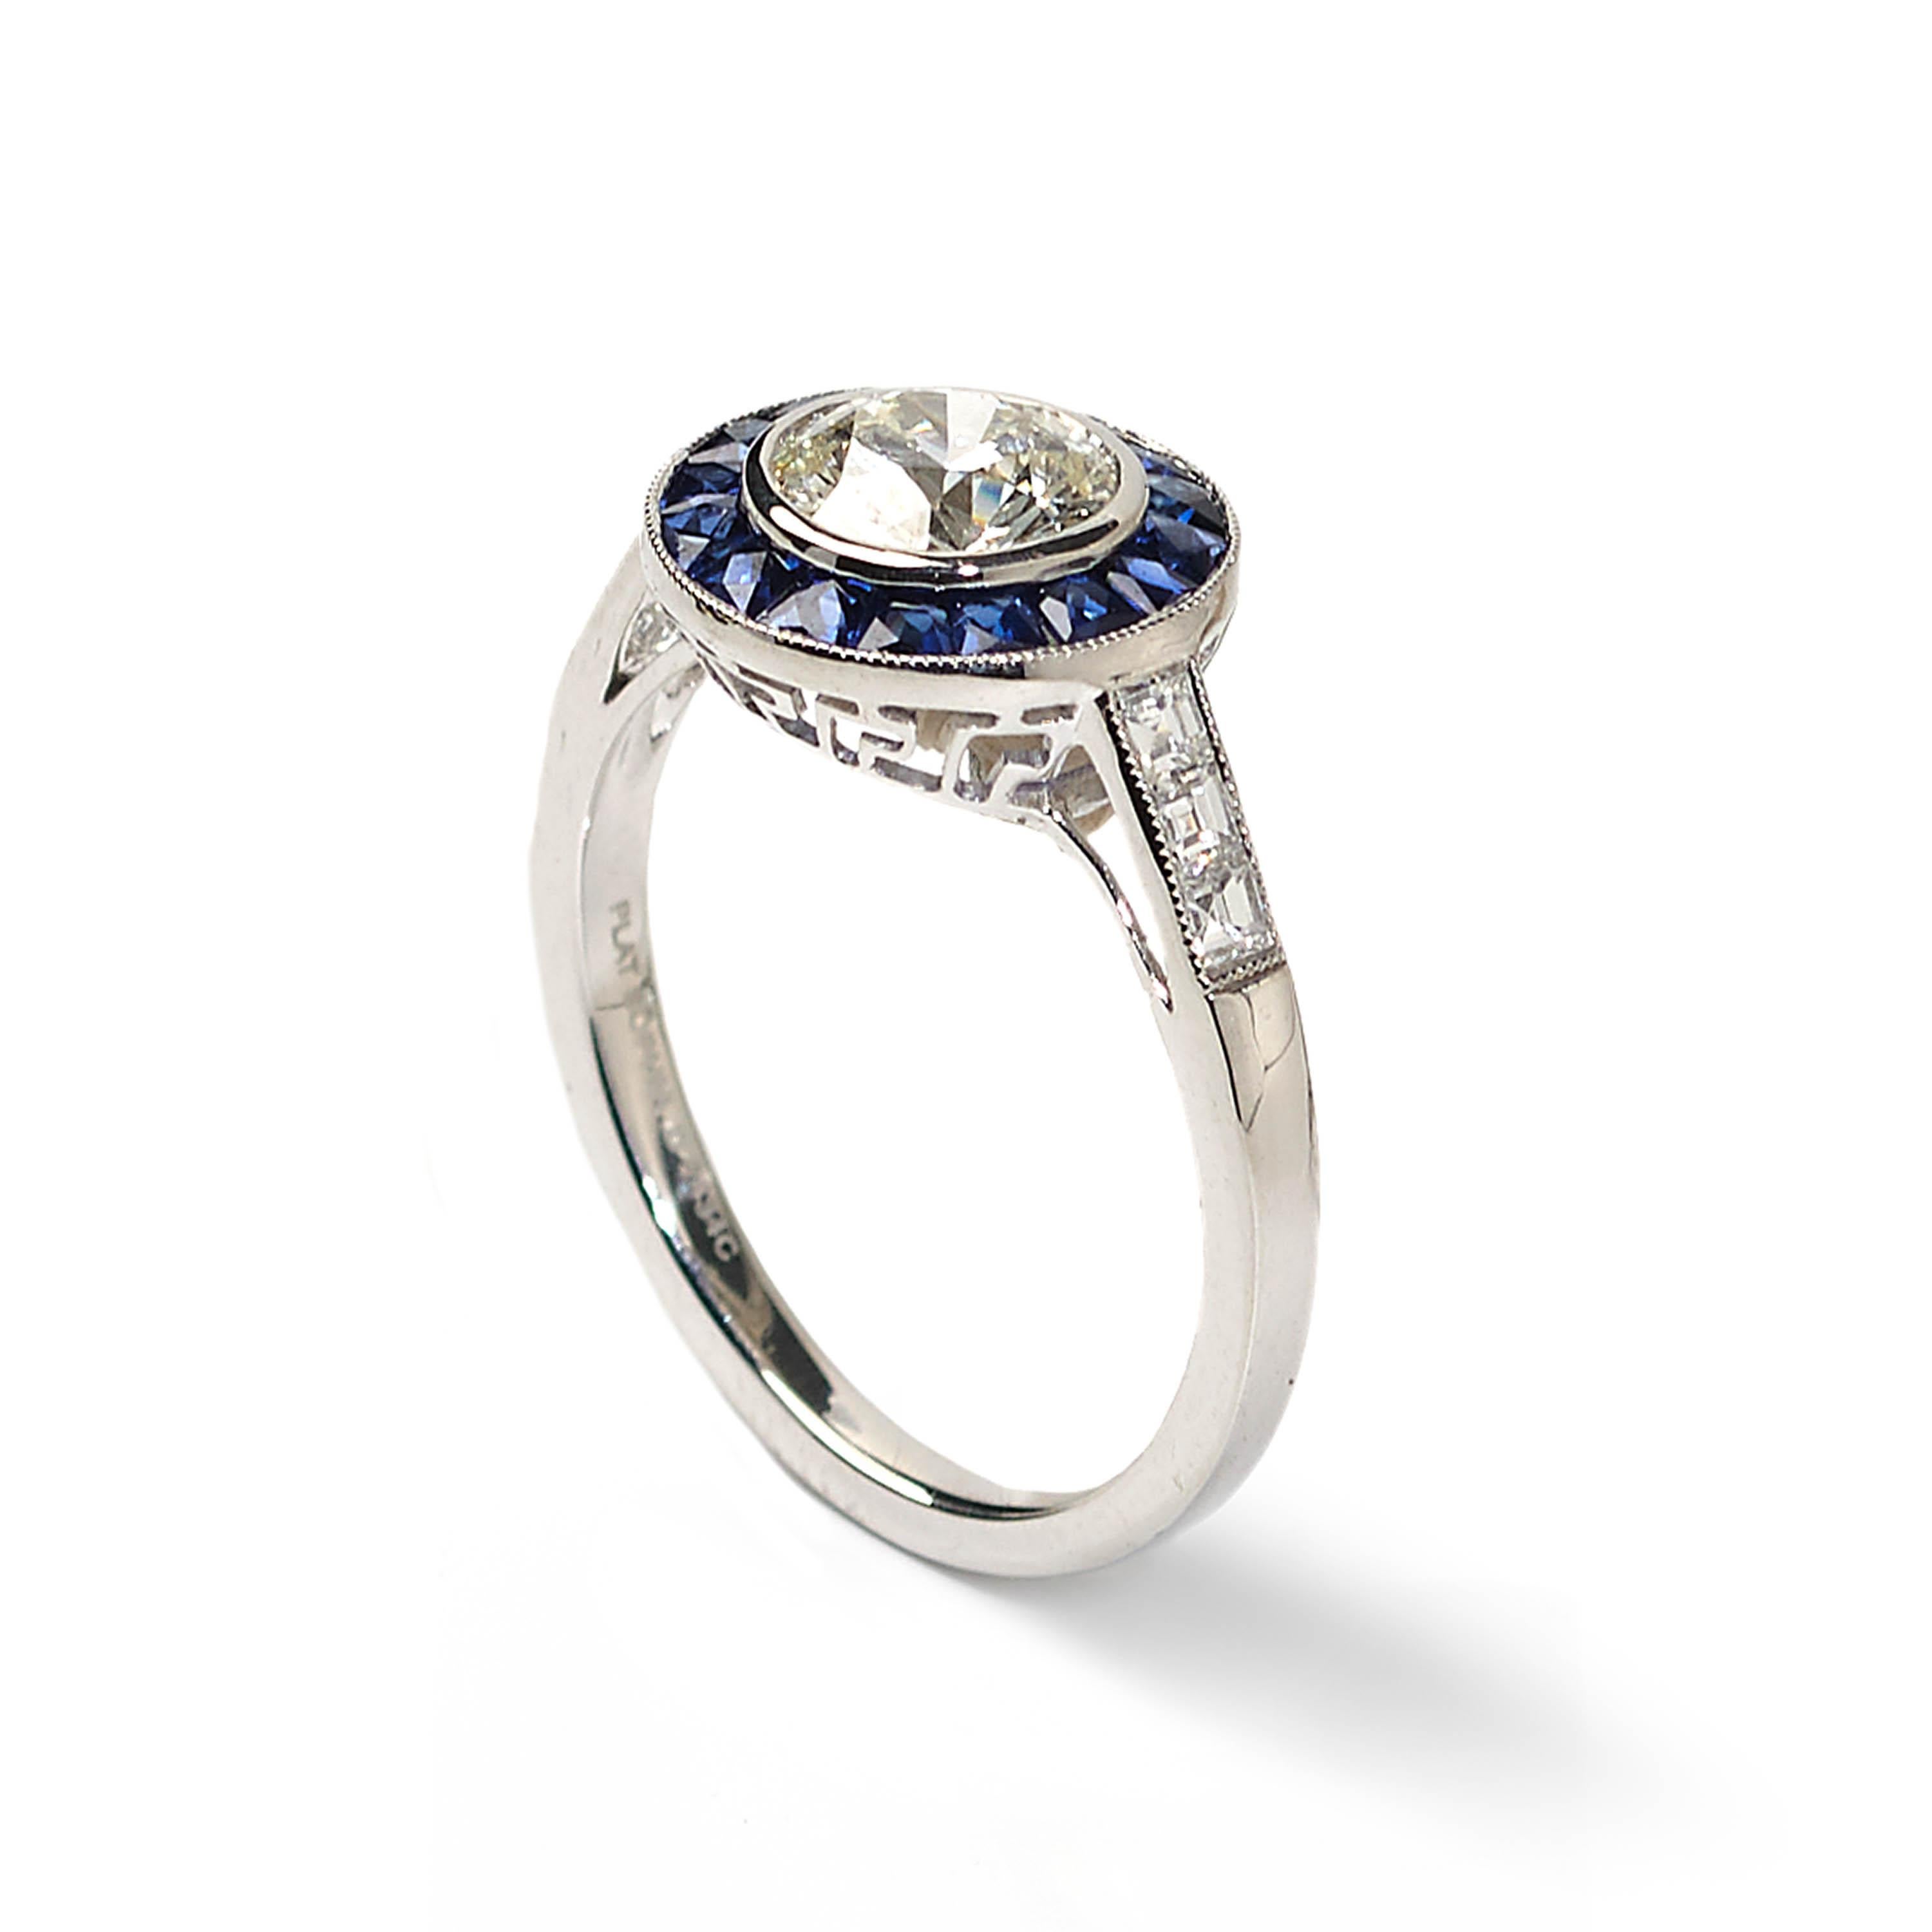 A modern halo design cluster ring set with a central round diamond weighing 1.00 carat, surrounded by a border of blue sapphires weighing a total of 0.68 carats, with diamond set shoulders weighing a total of 0.24 carats, mounted in platinum.